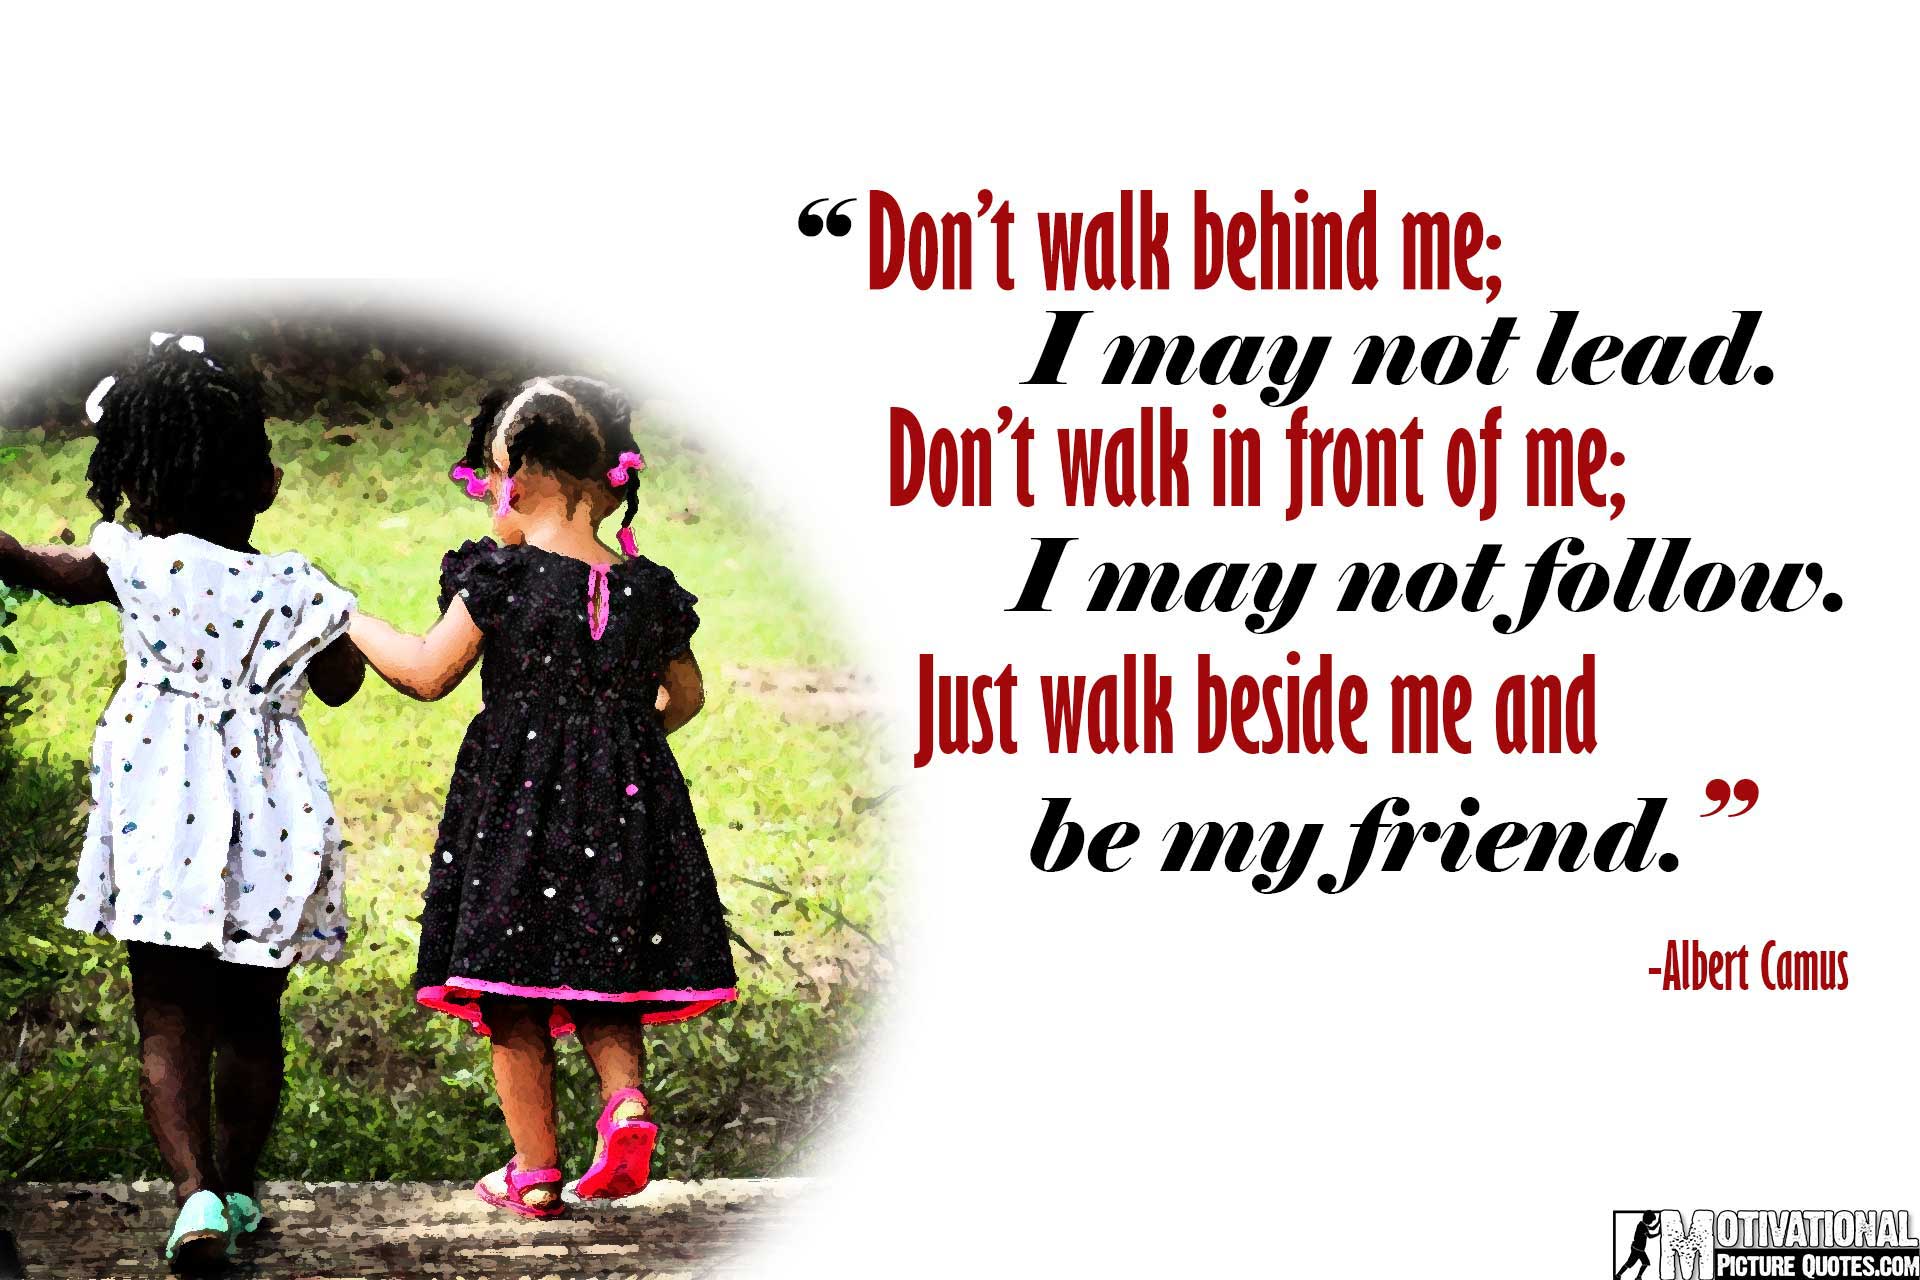 Inspirational Friendship Quotes Image. Free Download